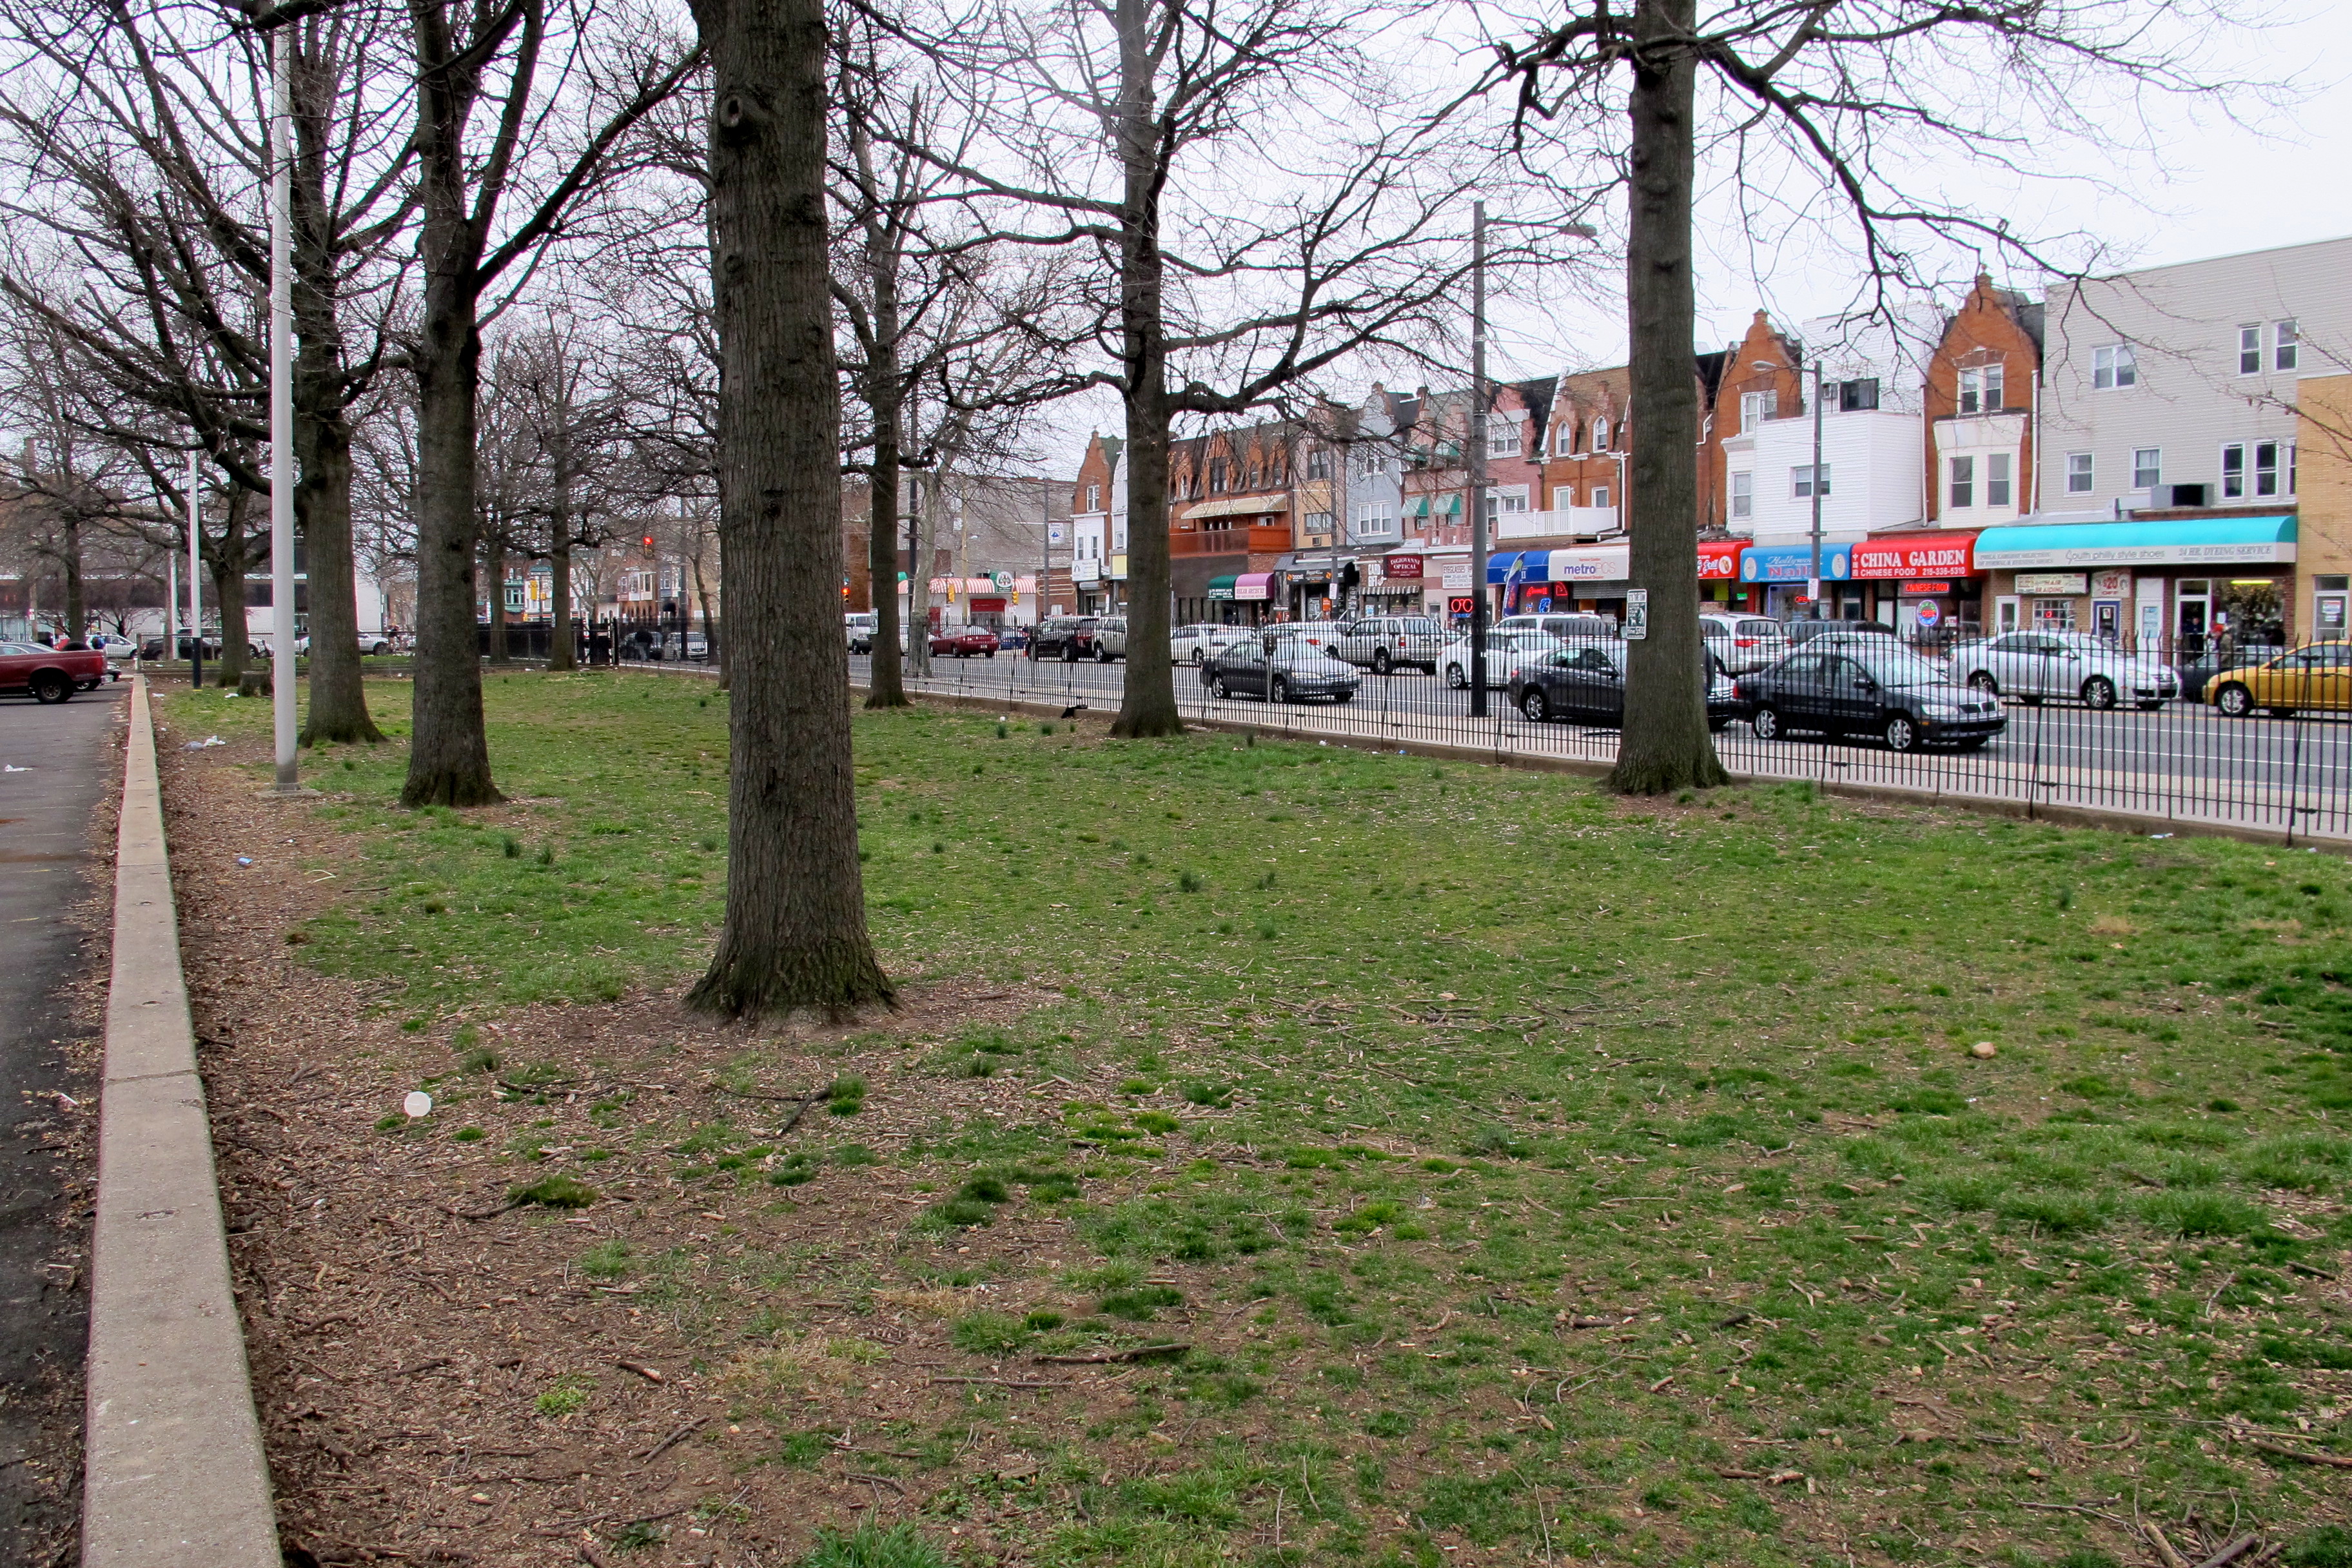 A park-like space could take root along South Broad Street for the community's enjoyment.